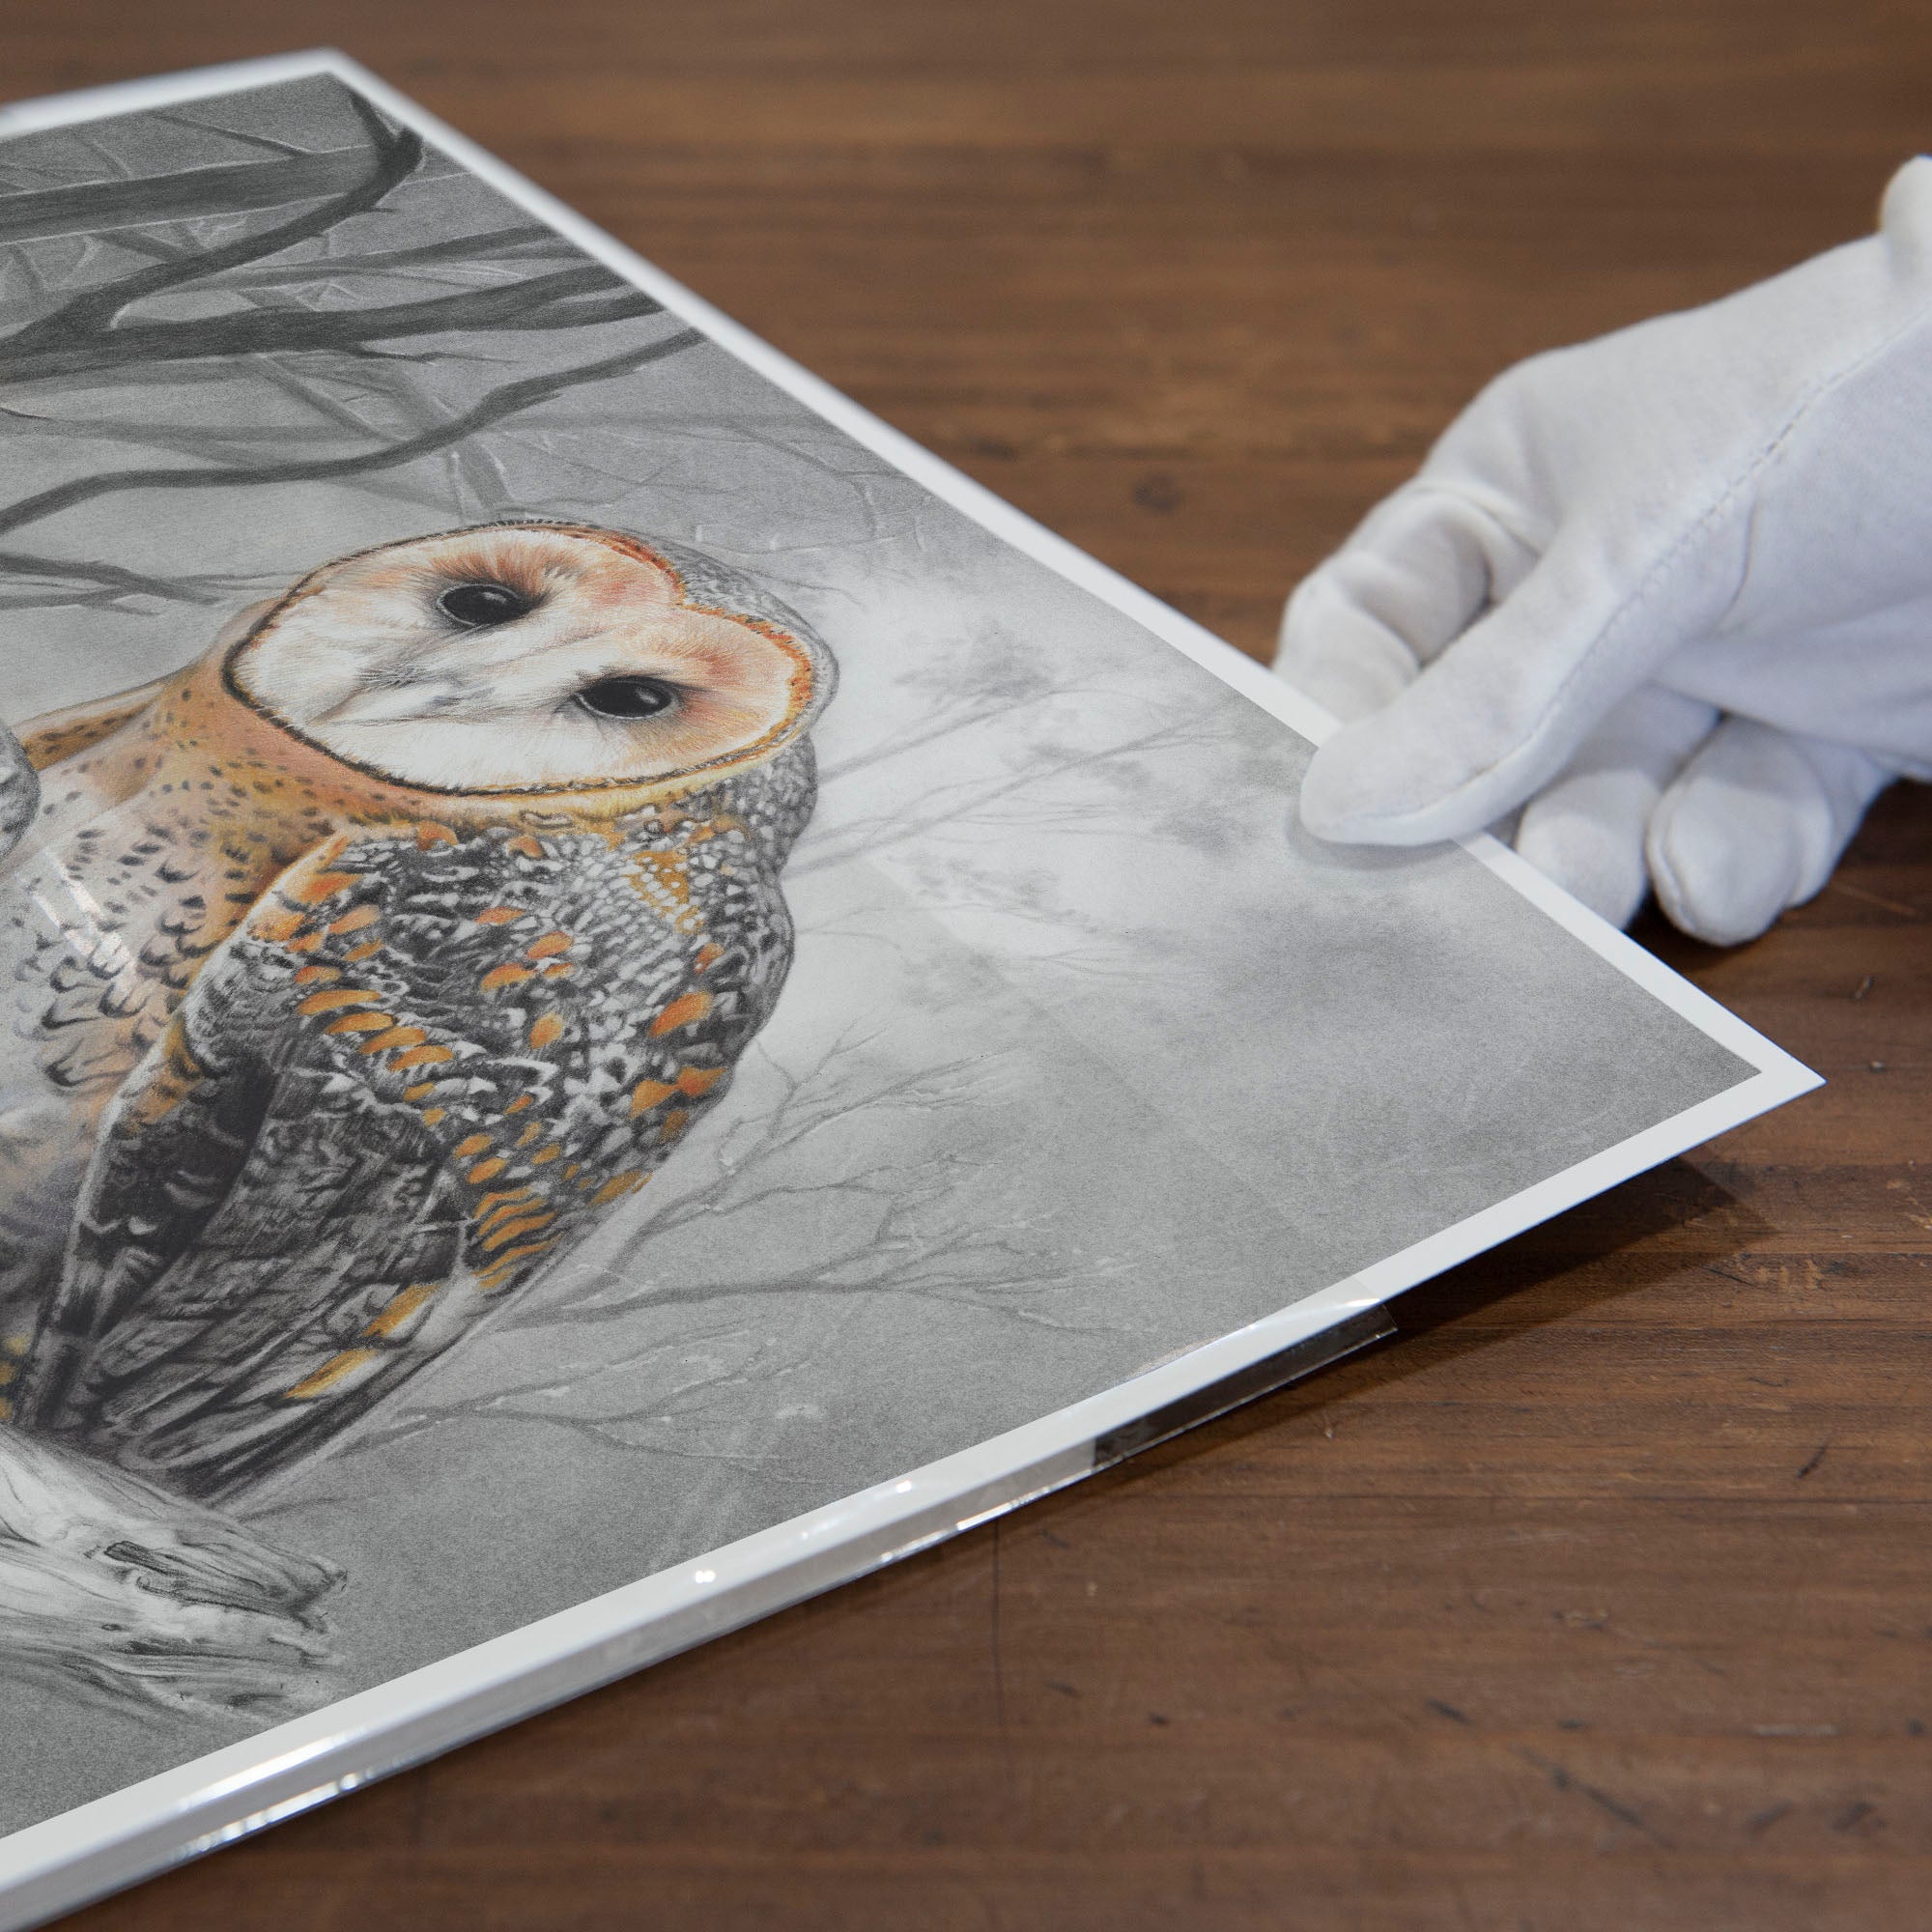 Black White Drawing Owl Made Pencil Stock Photo 330890306 | Shutterstock